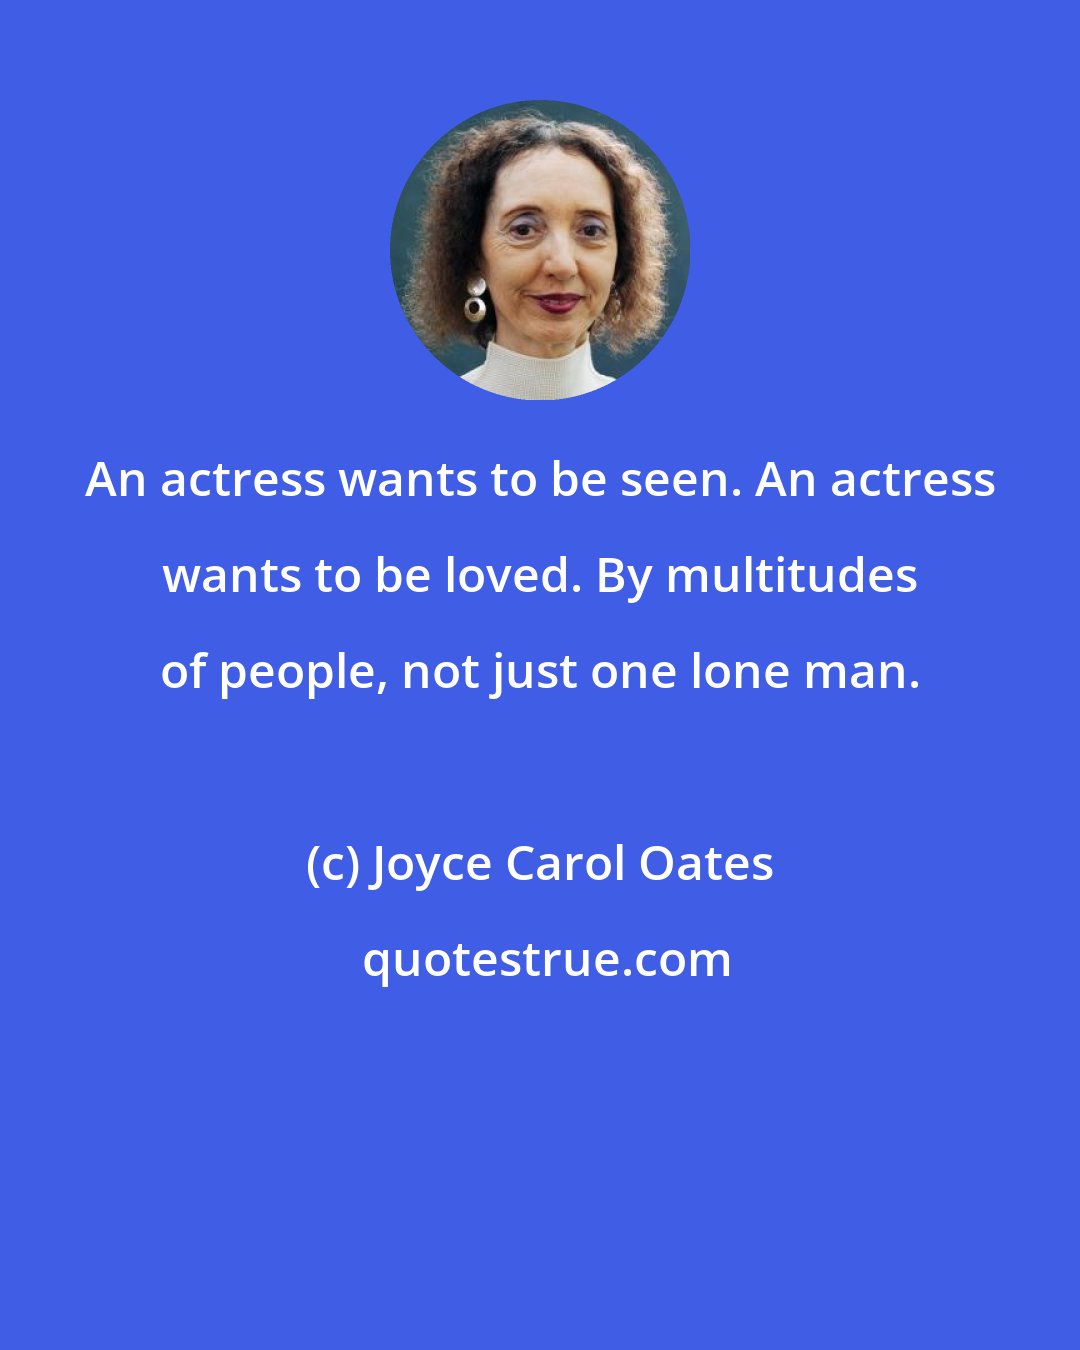 Joyce Carol Oates: An actress wants to be seen. An actress wants to be loved. By multitudes of people, not just one lone man.